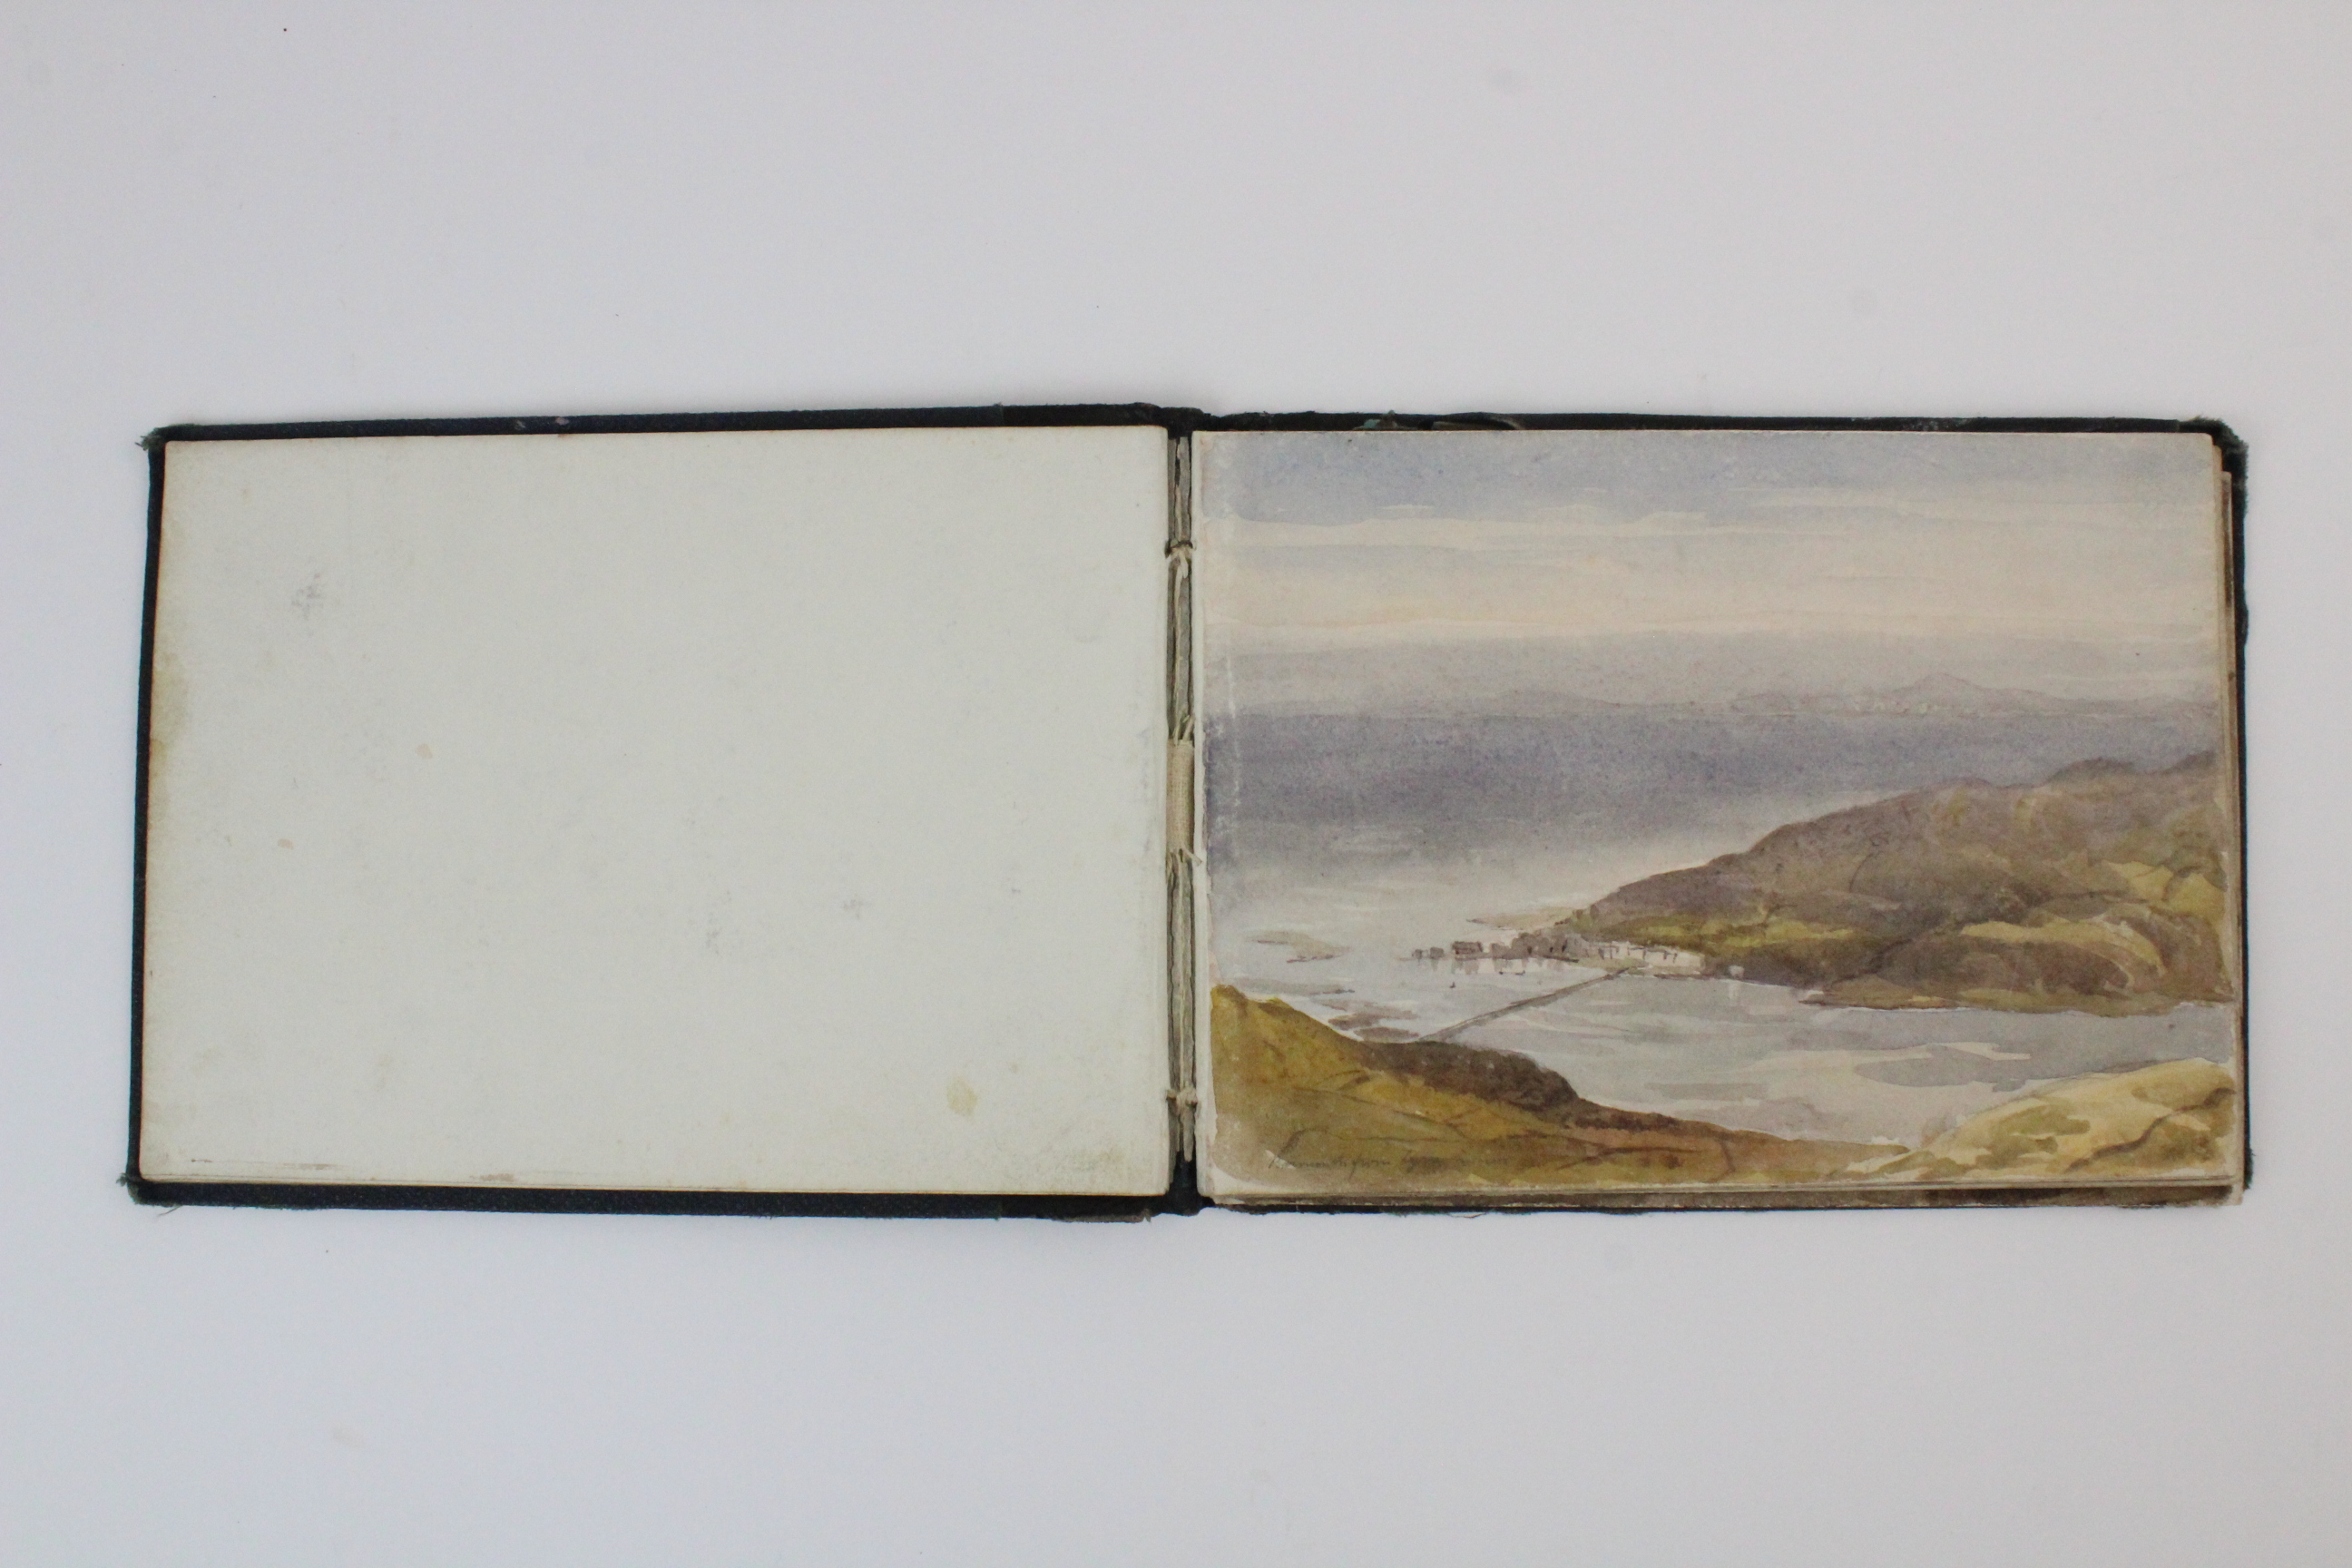 A collection of watercolours, pen and ink sketches and pencil sketches, early 20th century, loose, - Image 15 of 45